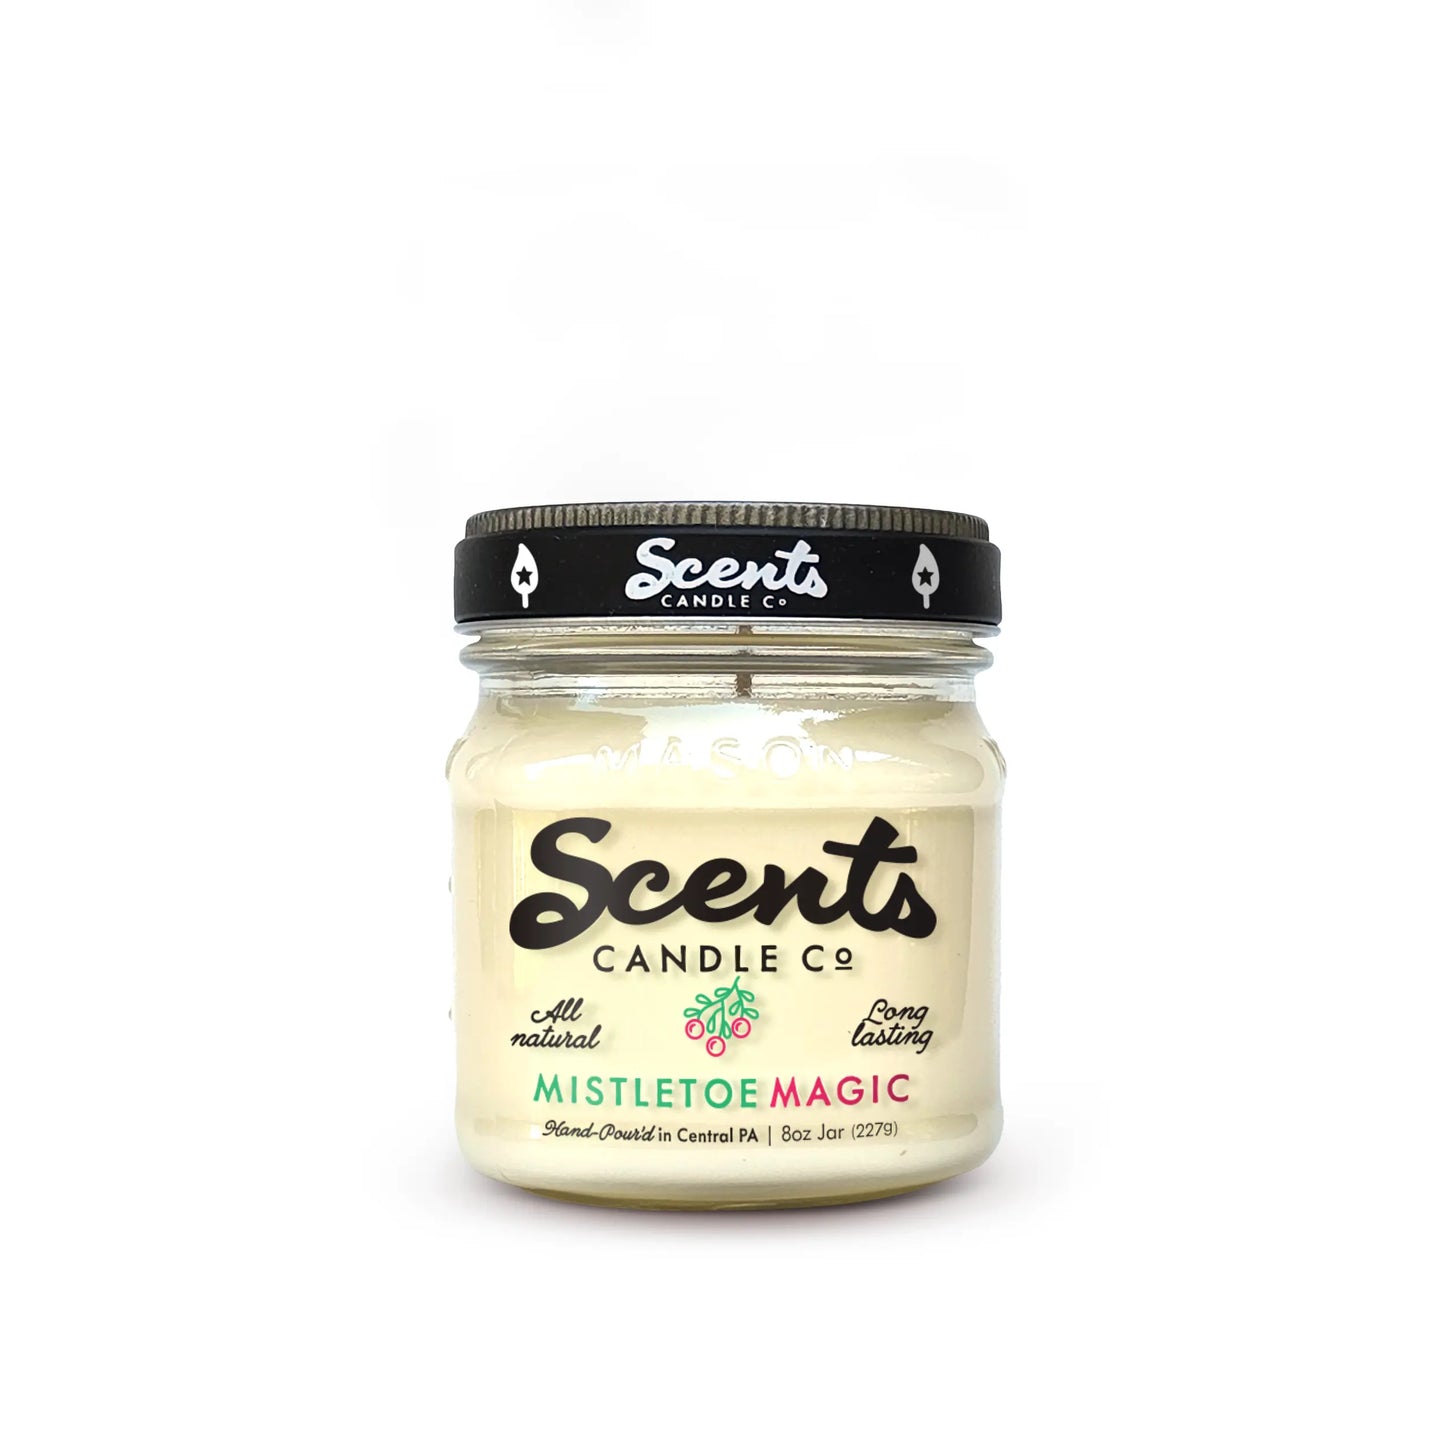 Scents Candle Co. Mistletoe Magic Soy Wax Candles